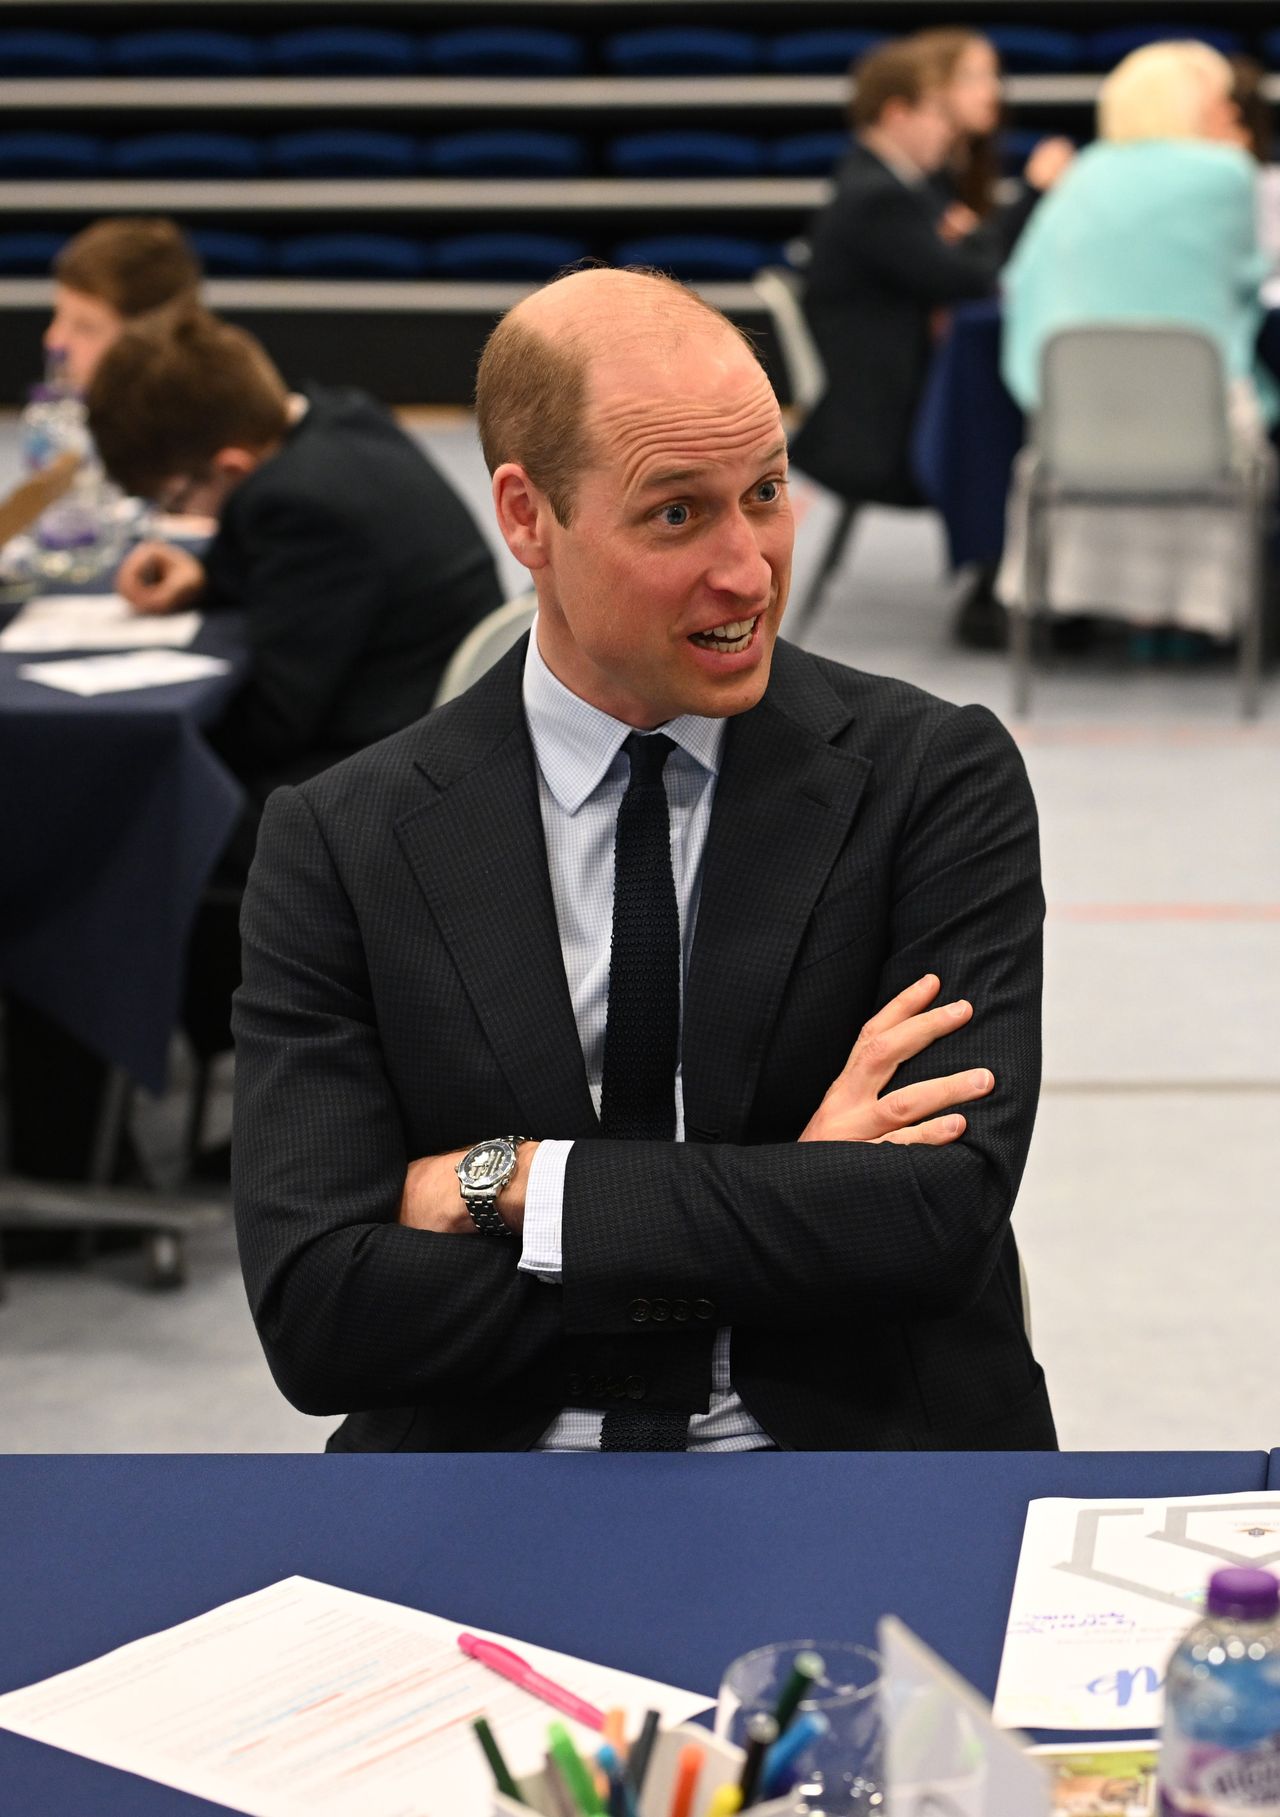 Prince William returned to his duties.